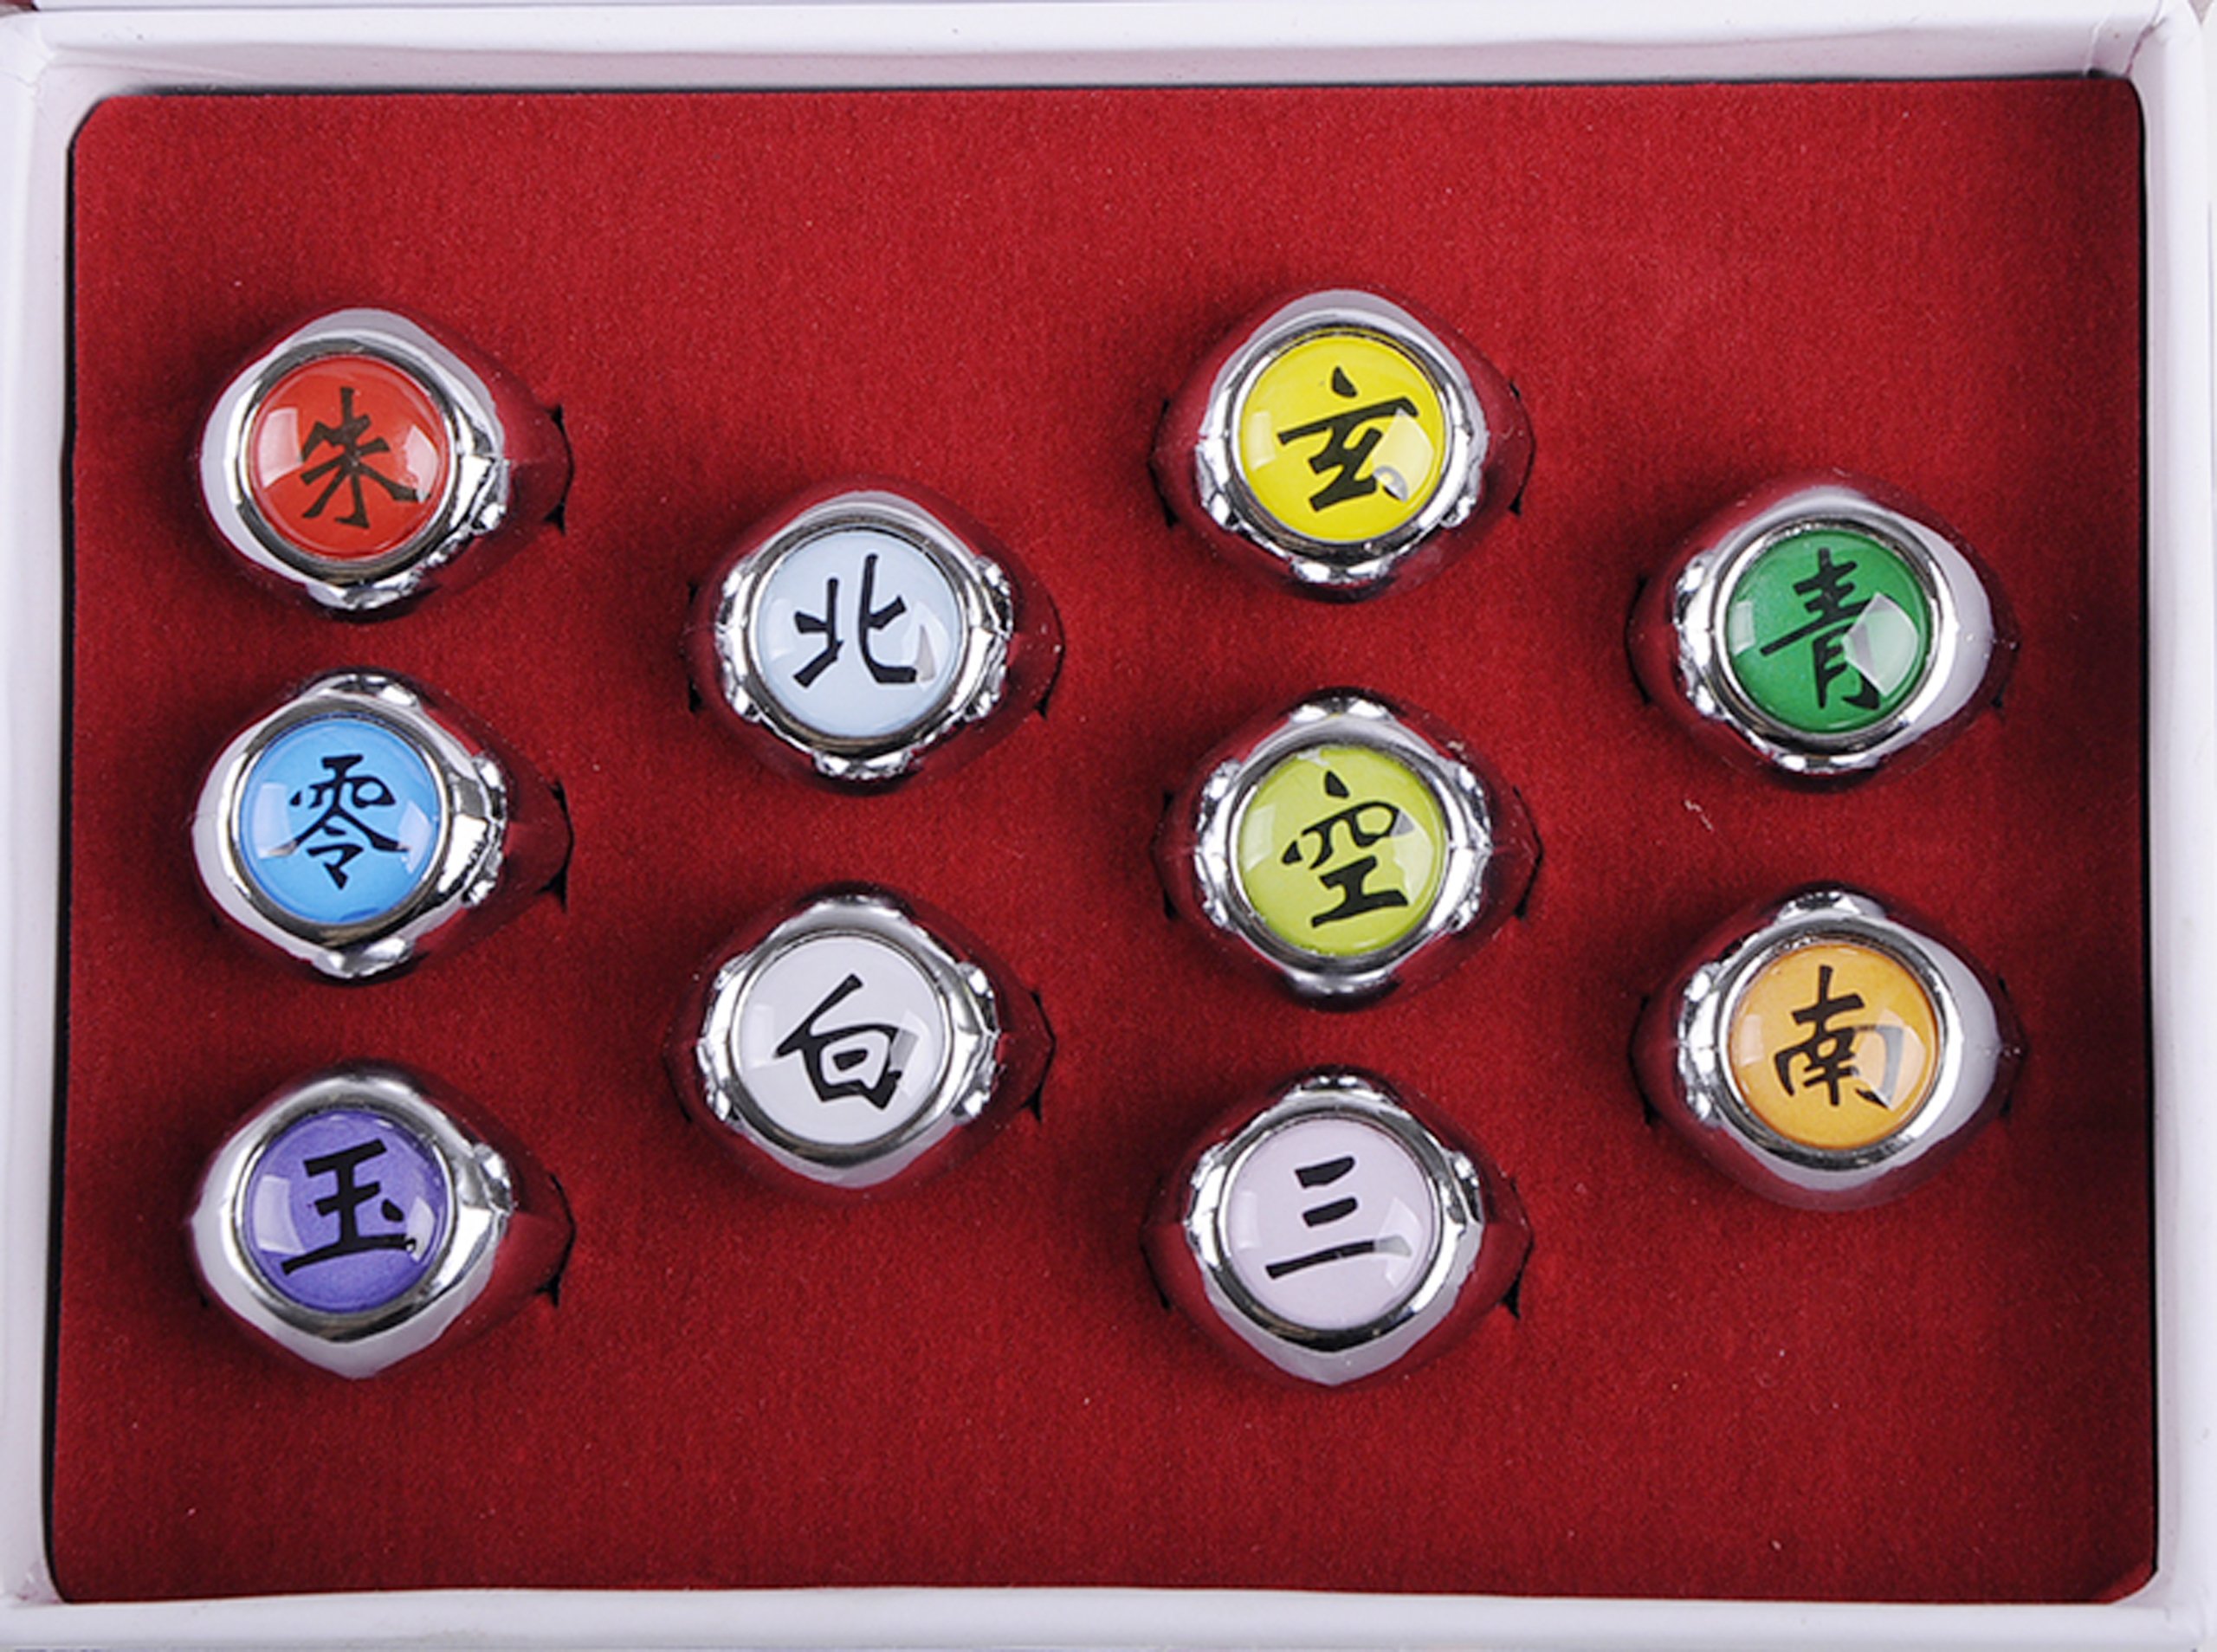 What are Akatsuki Rings and what is the meaning of each ring on each finger